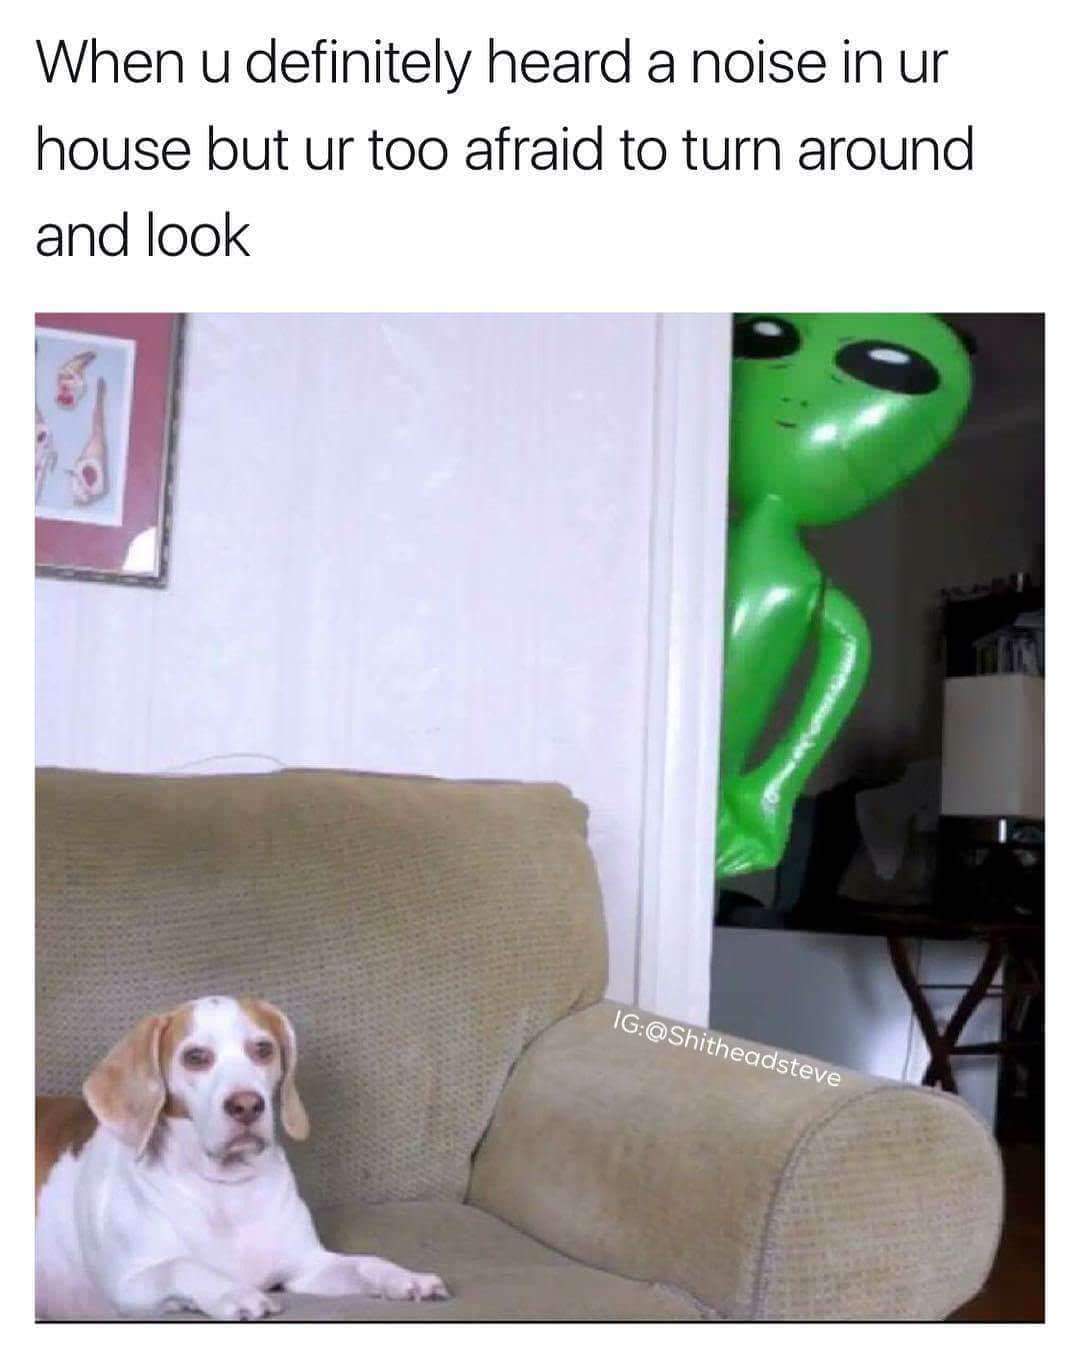 Funny dog meme about ignoring that scary noise in your house